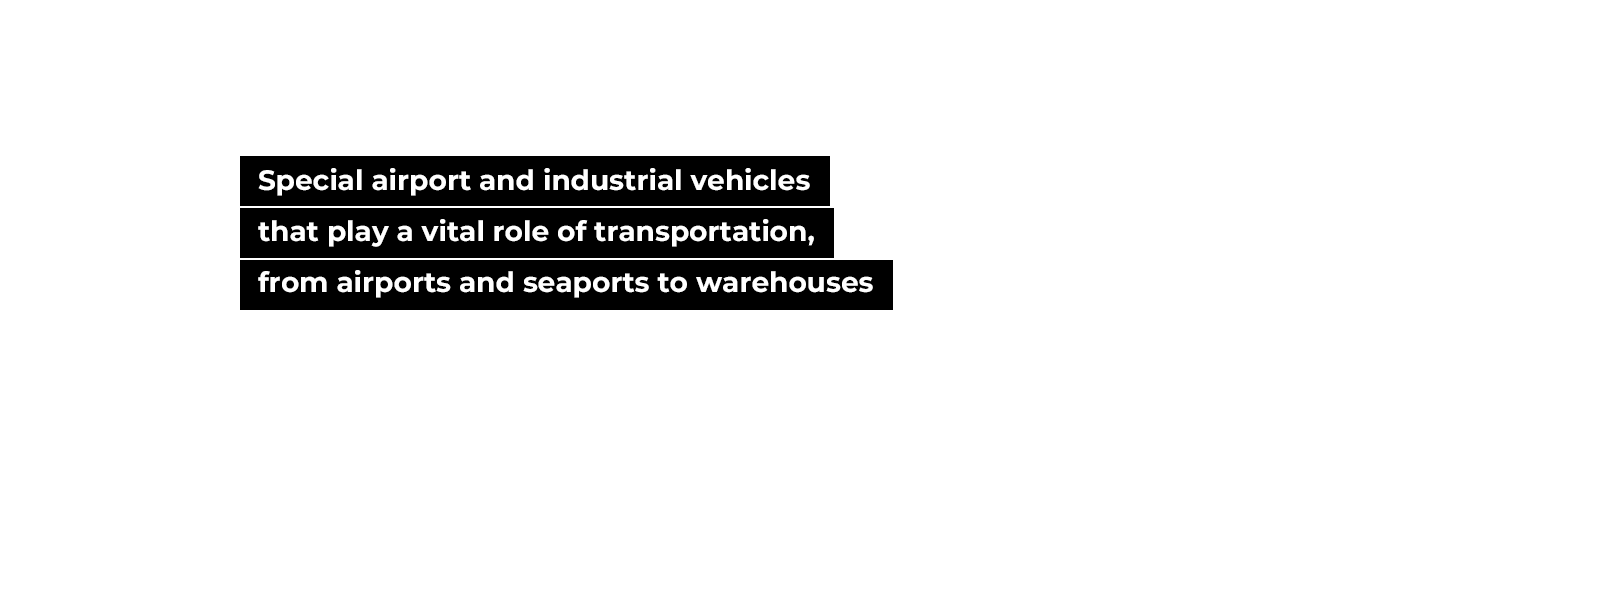 Special airport and industrial vehicles that play a vital role of transportation, from airports and seaports to warehouses